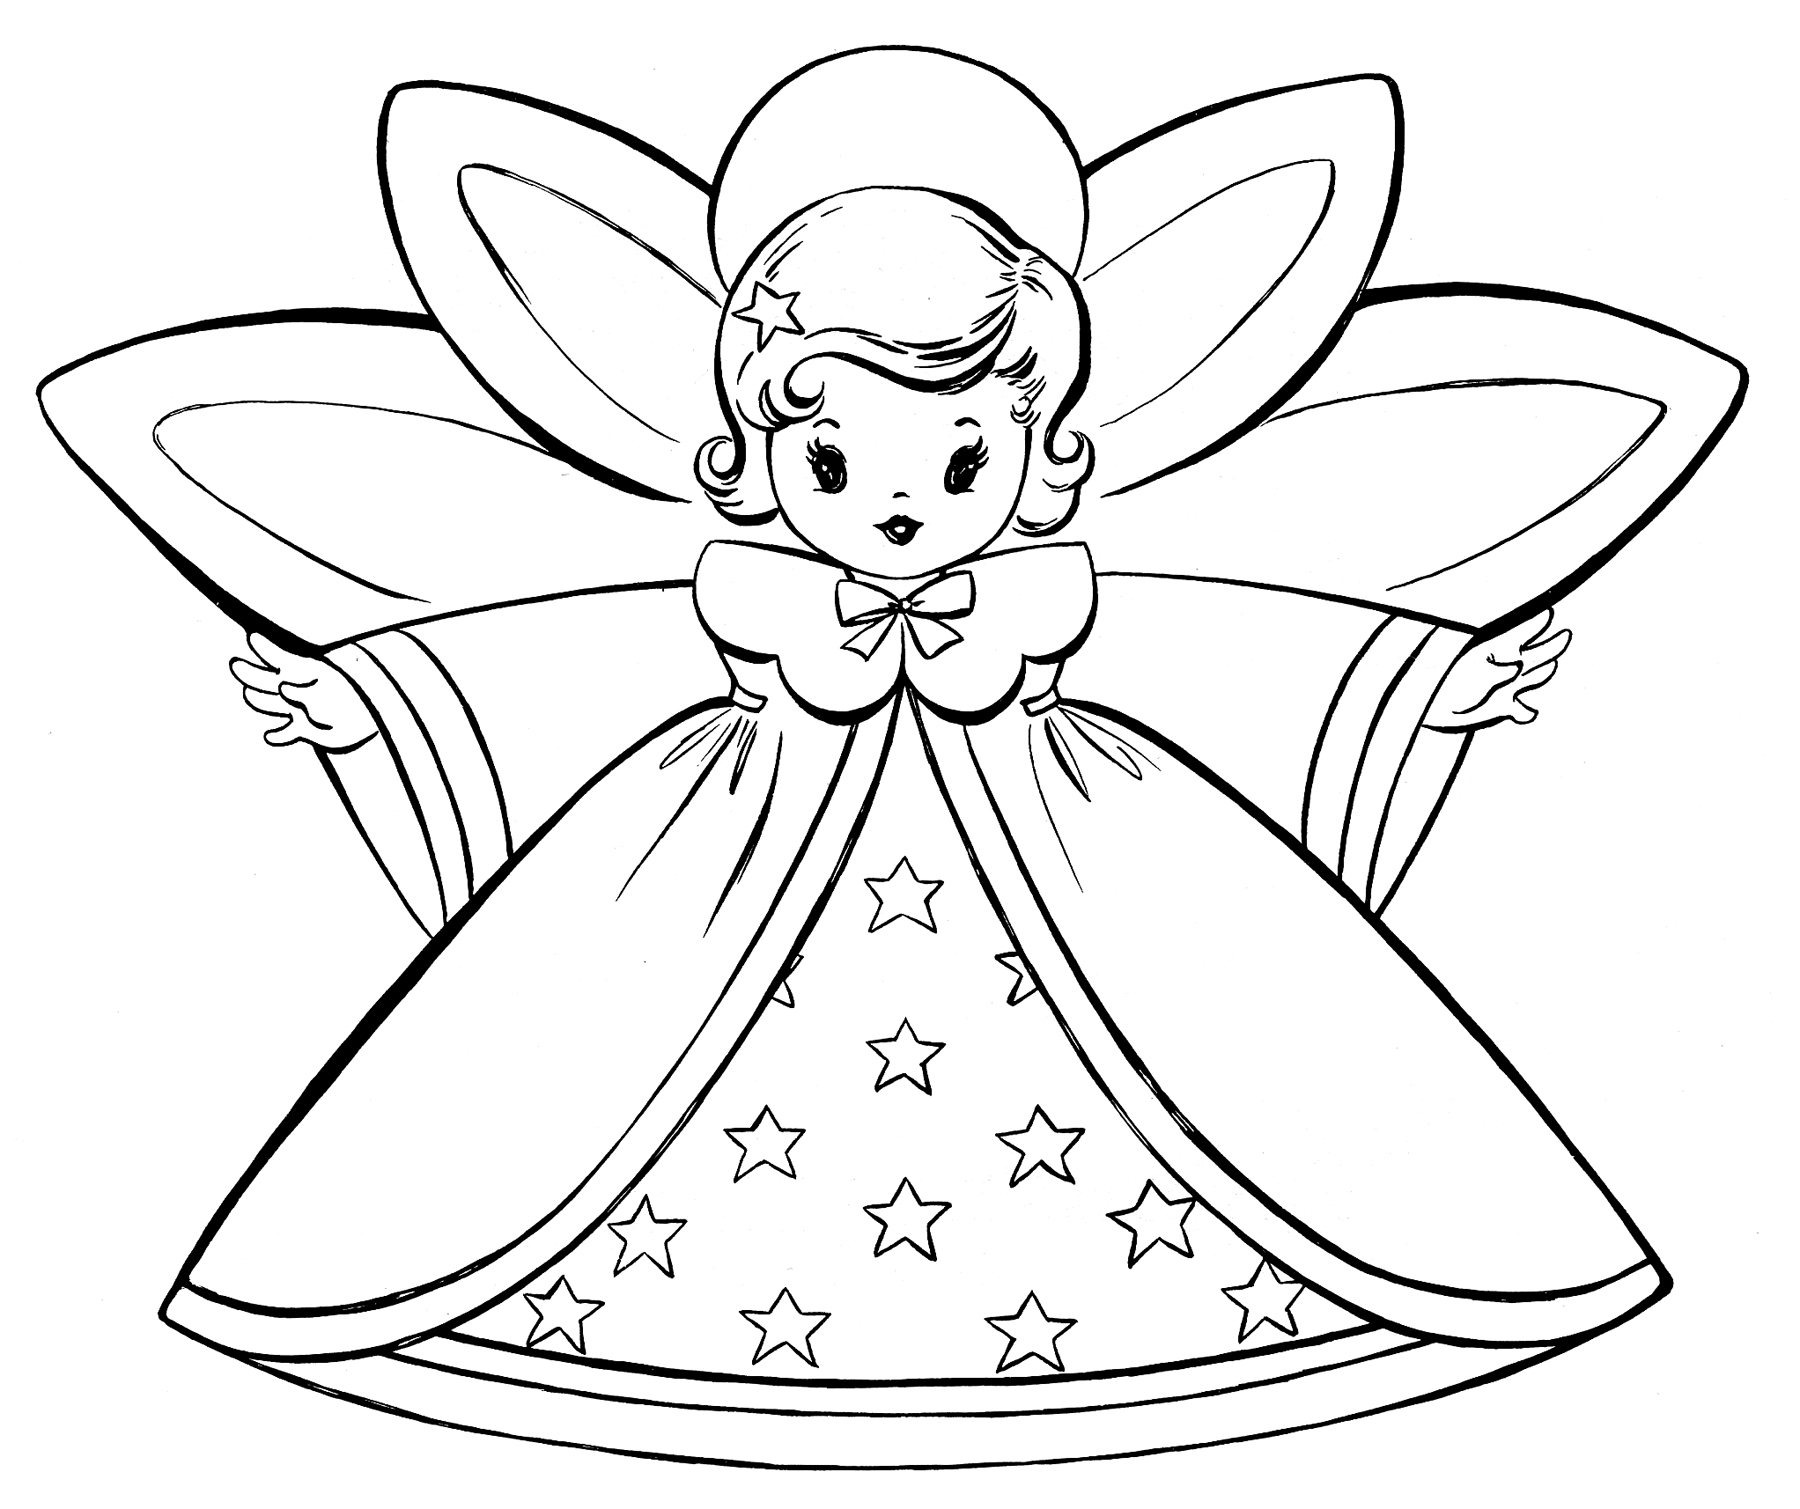 Worksheets : Free Christmas Coloring Retro Angels The Graphics Fairy For  Year Olds Graphicsfairy Musical Games Kids Ps4 Little Autumn Crafts  Toddlers Preschool Printables Fun Group Typing. Coloring Pages For 6 Year